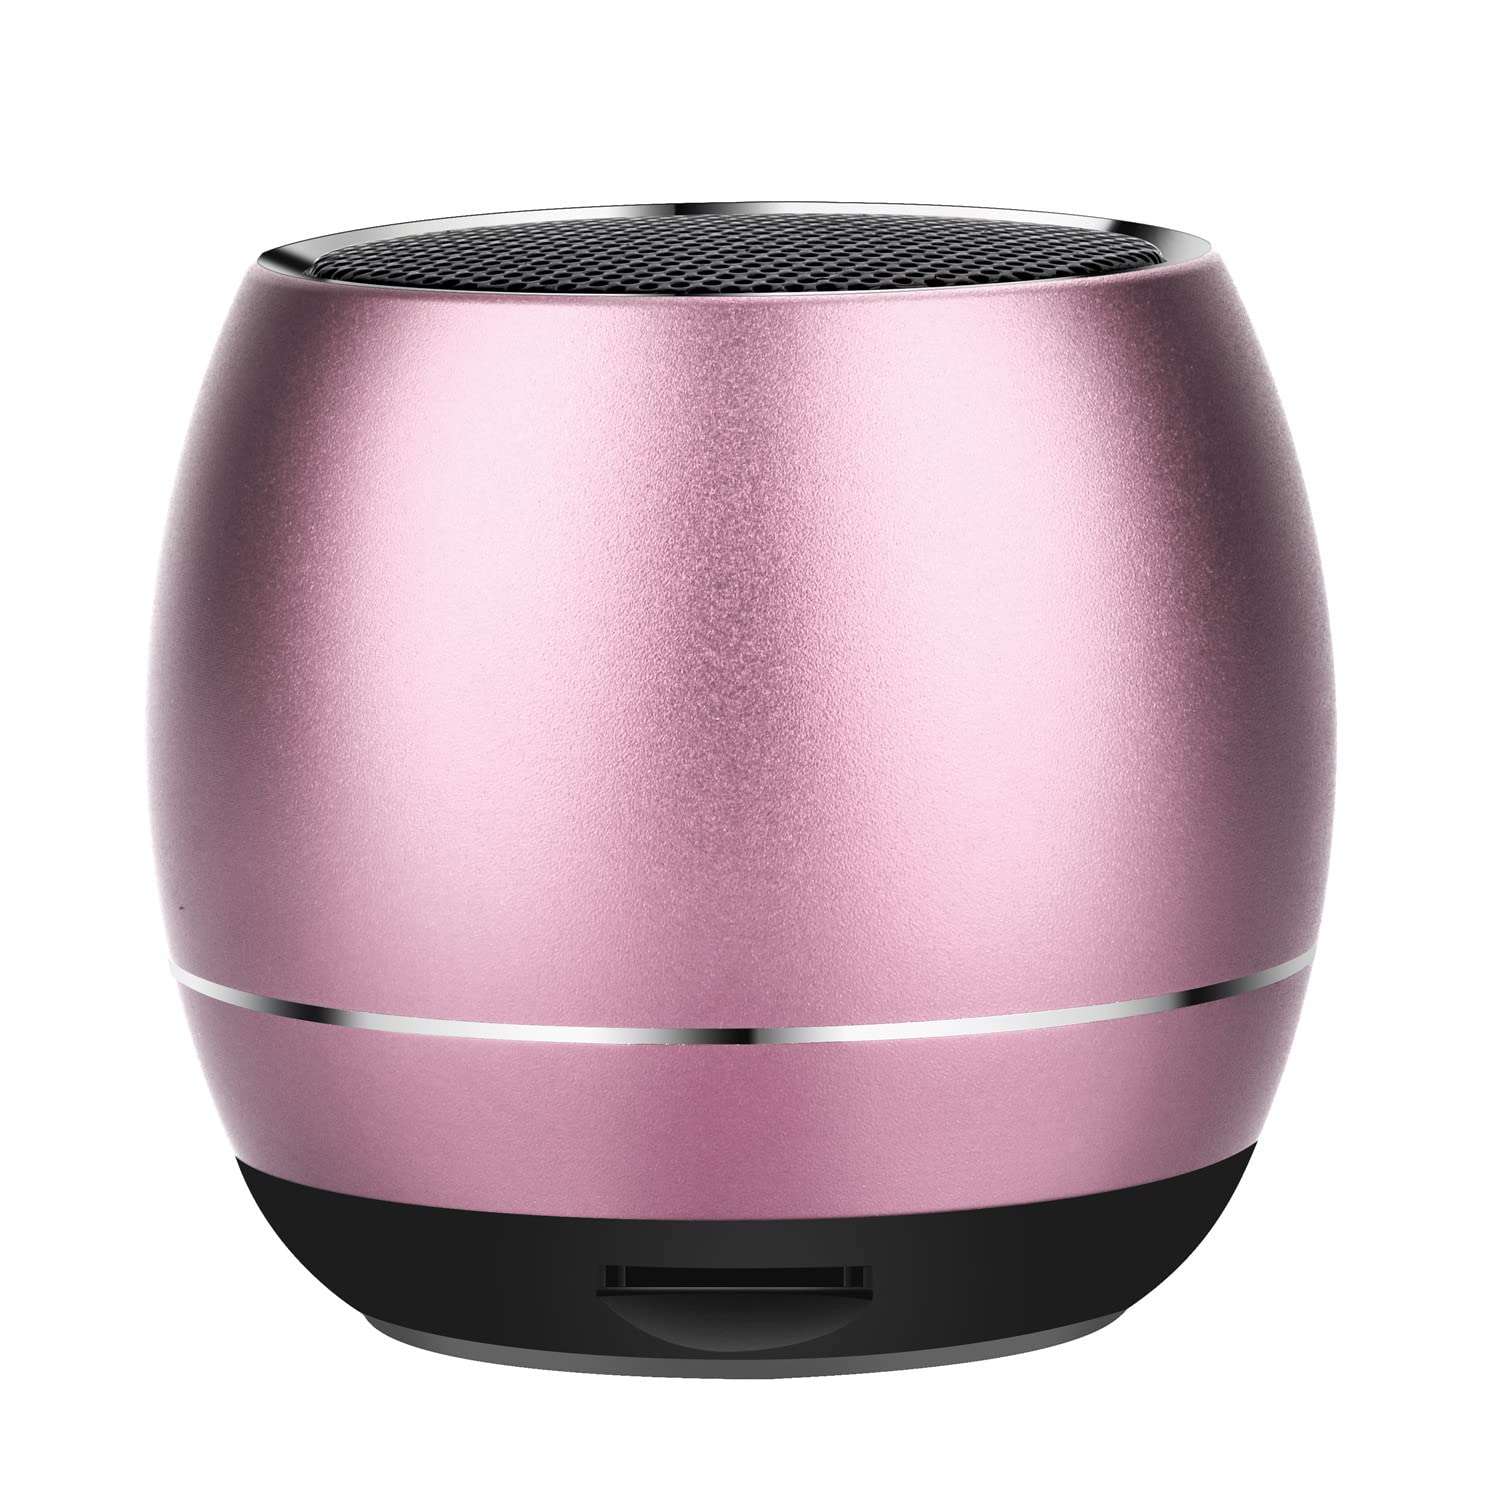 Aresrora Portable Bluetooth Speakers,Outdoors Wireless Mini Bluetooth Speaker with Built-in-Mic,Handsfree Call,TF Card,HD Sound and Bass for iPhone Ipad Android Smartphone and More (Rose Gold)